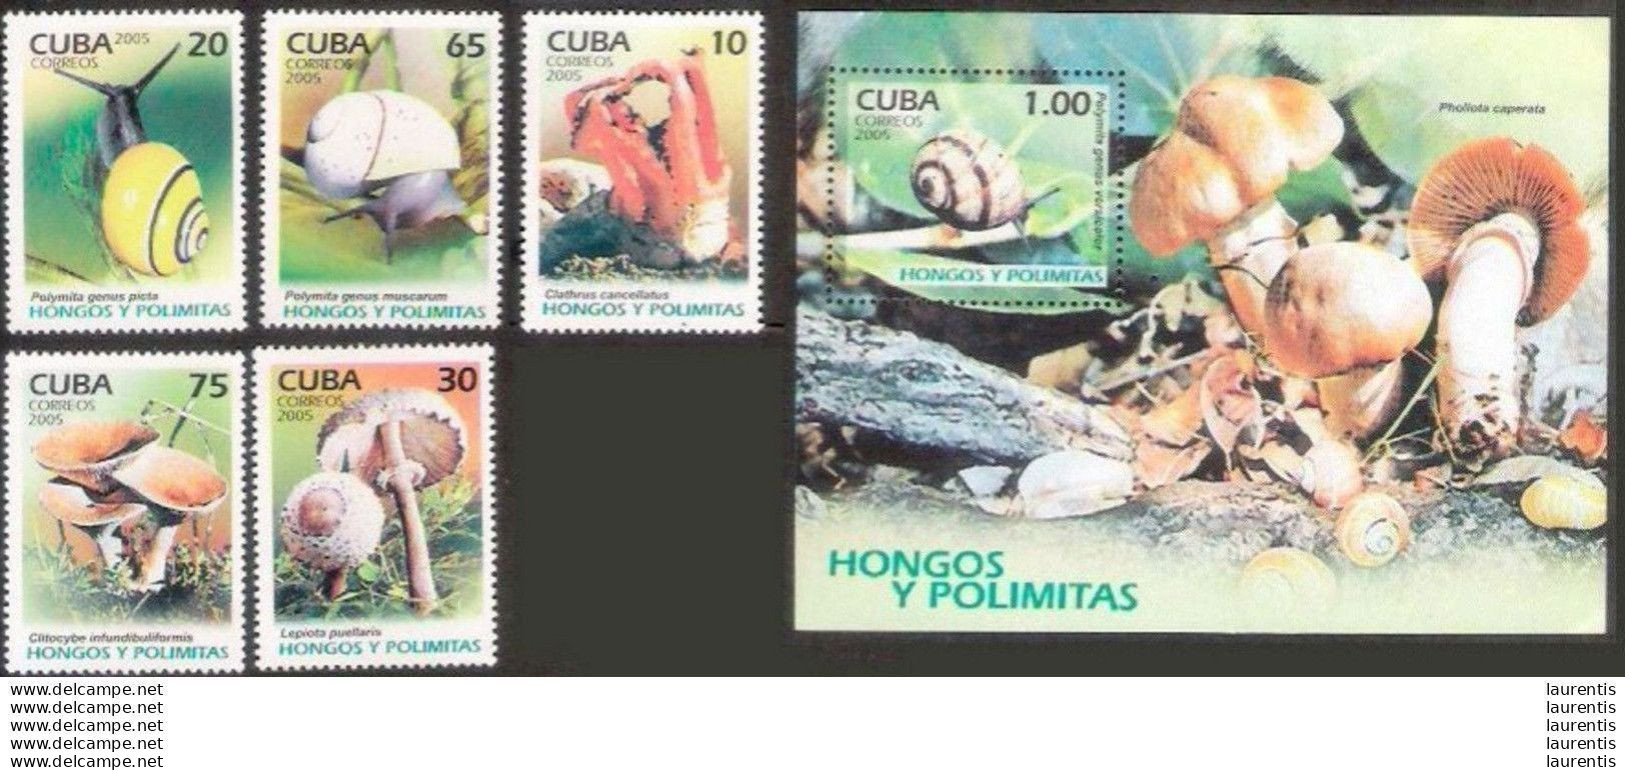 633  Mushrooms - Champignons - Stamps + SS - 2005 - MNH - Cb - 2,25 -- - Funghi